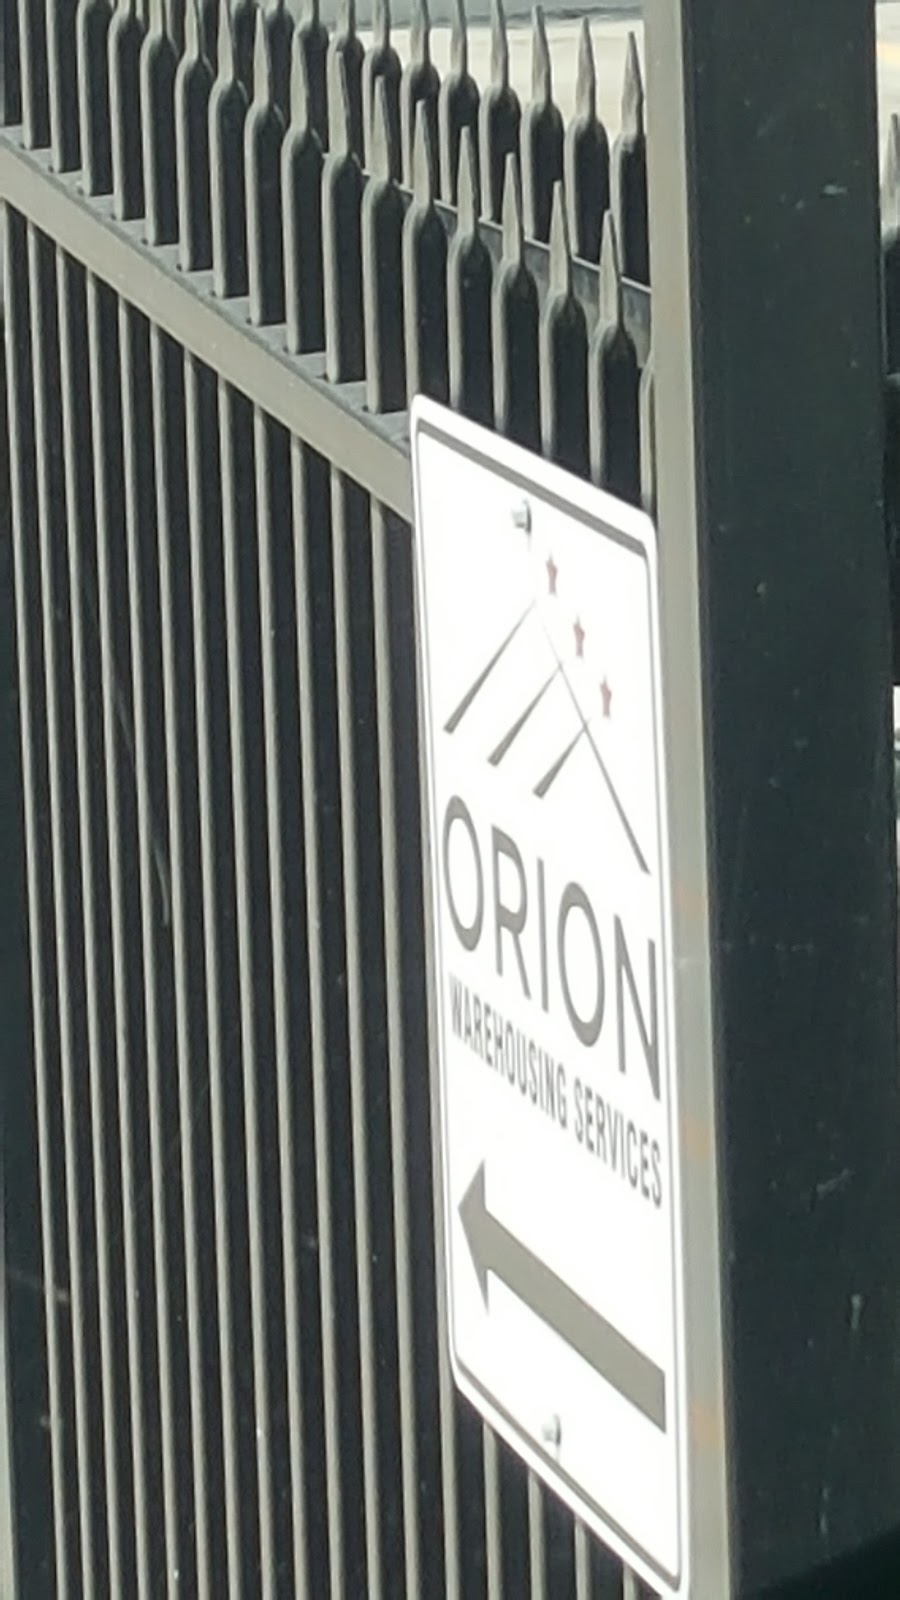 Orion Warehousing Services | 677 Hanna Dr Suite A, American Canyon, CA 94503 | Phone: (707) 554-1488